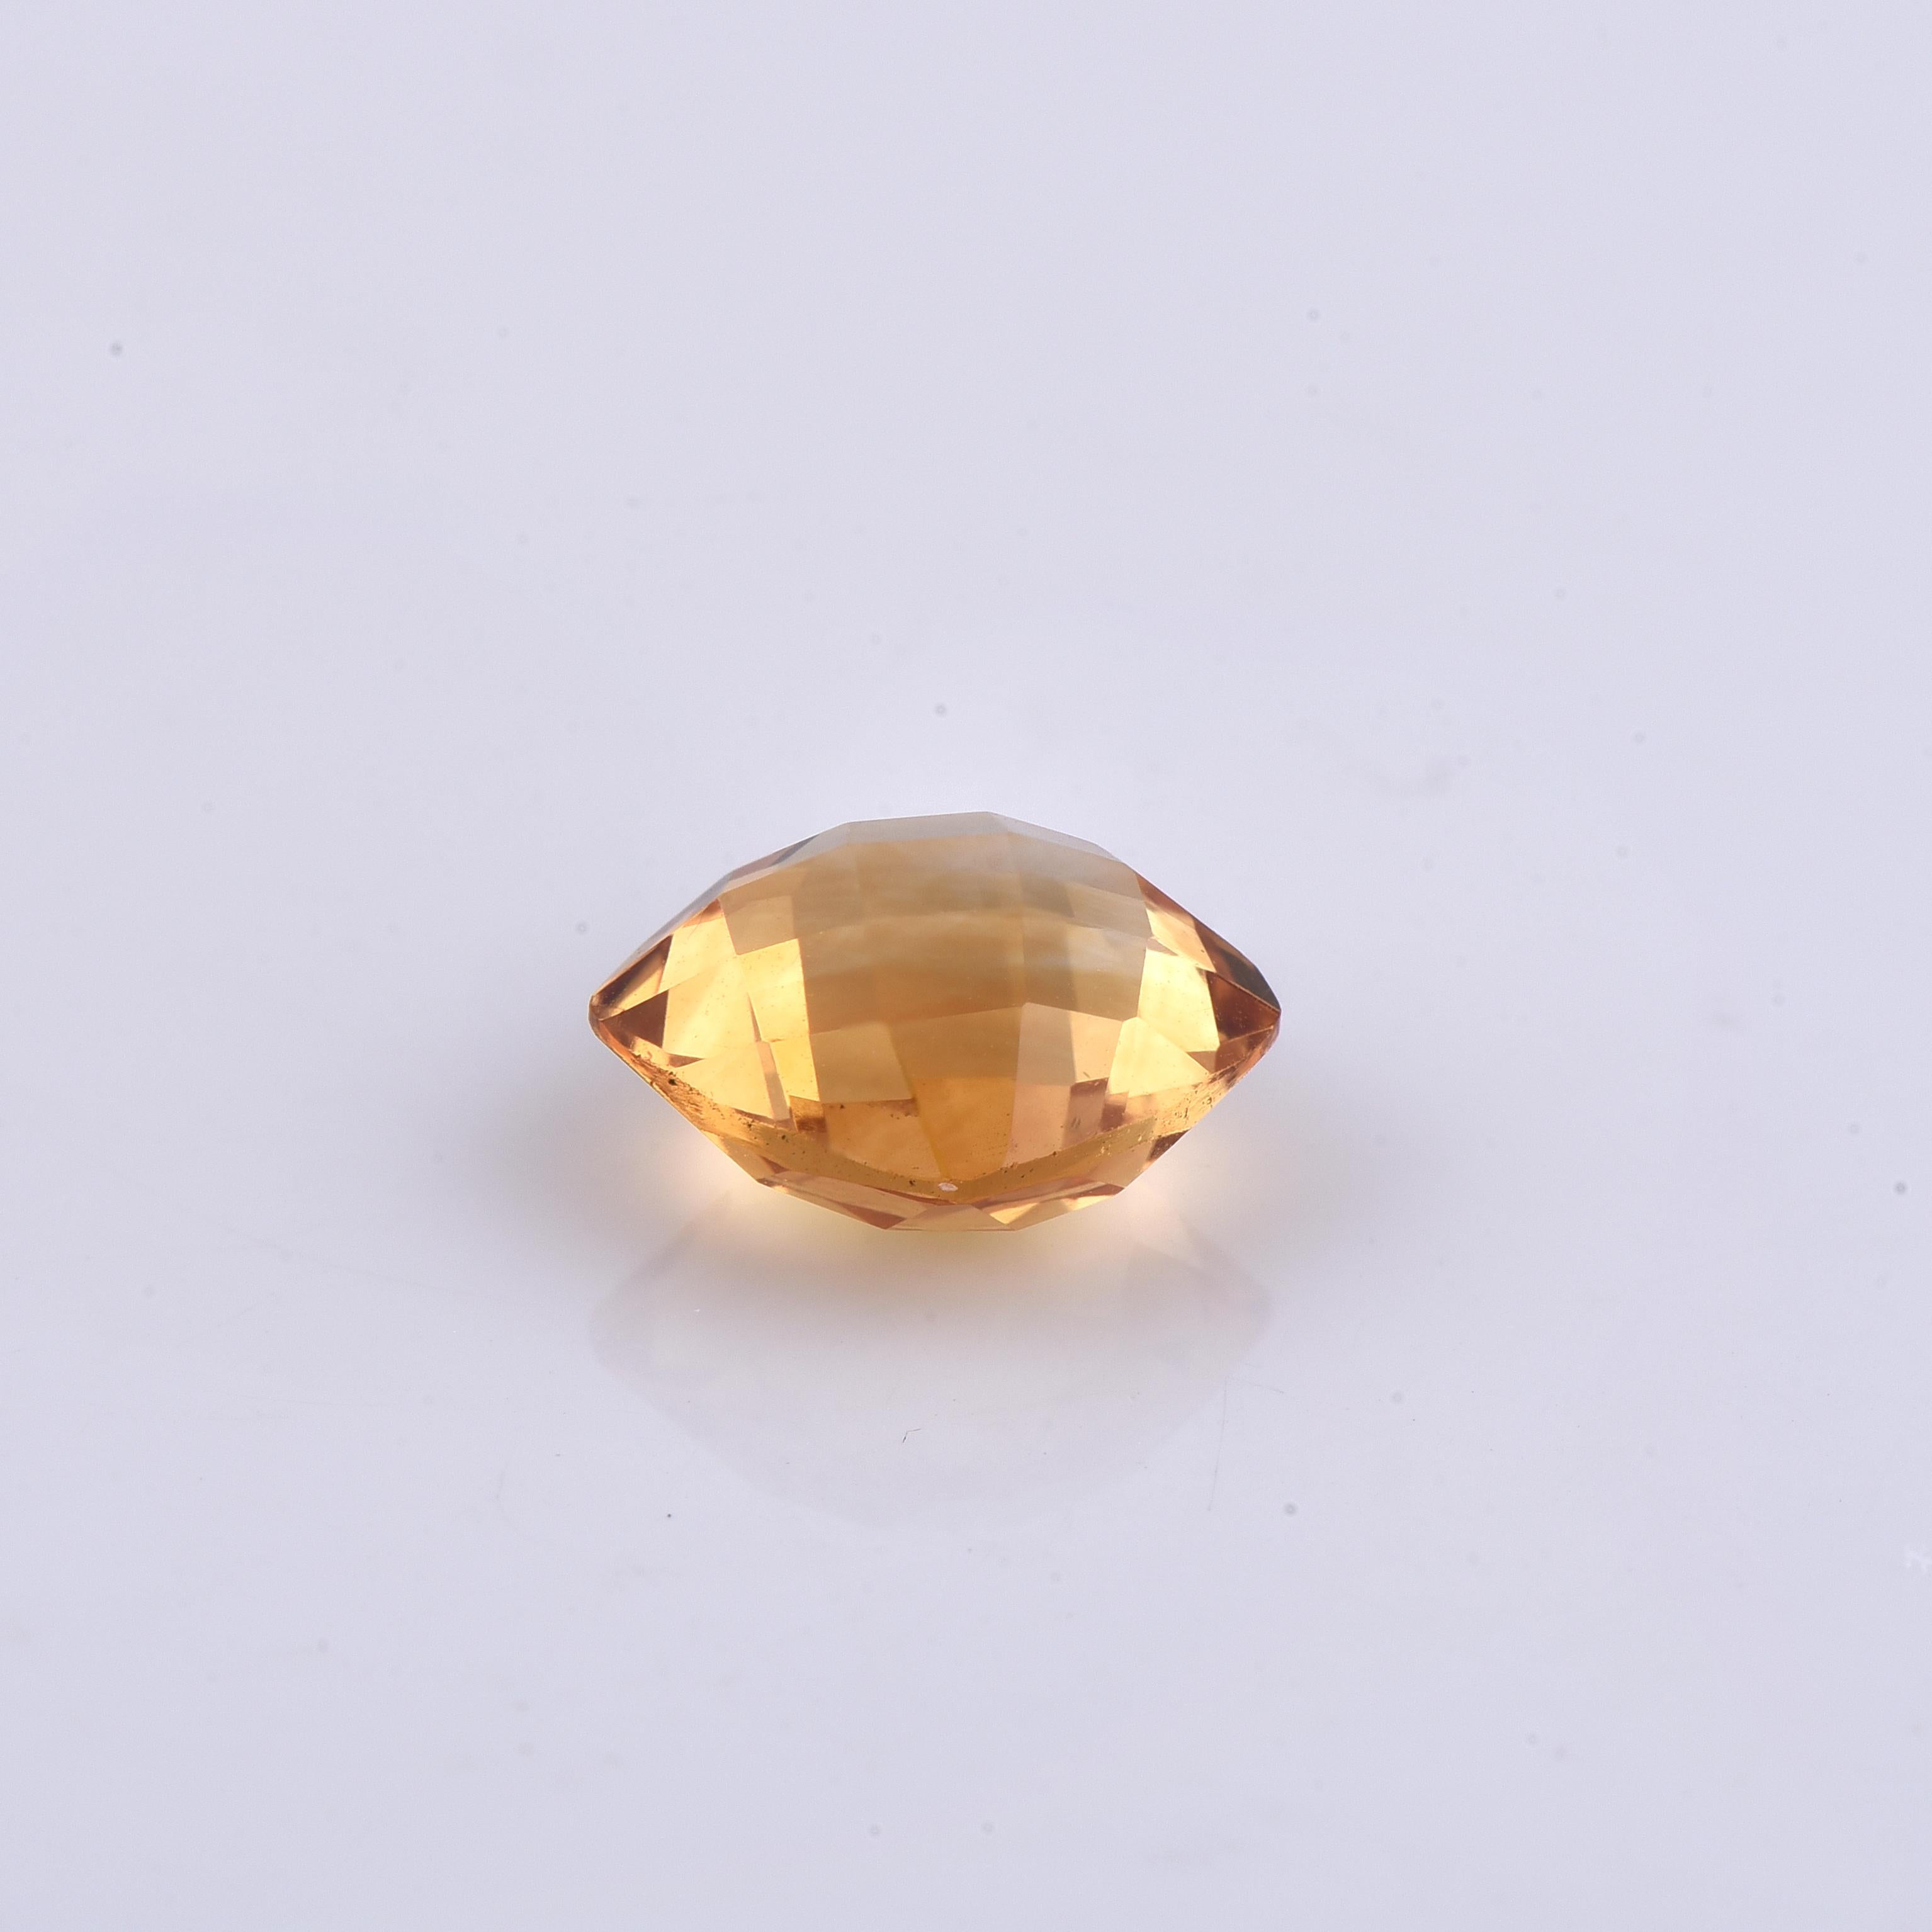 Stone Information: Natural Citrine 
Shape/Cut: Cushion Cut
Color: Yellow
Dimensions (mm): 10.00 x 10.00 x 5.70
Weight: 3.97ct